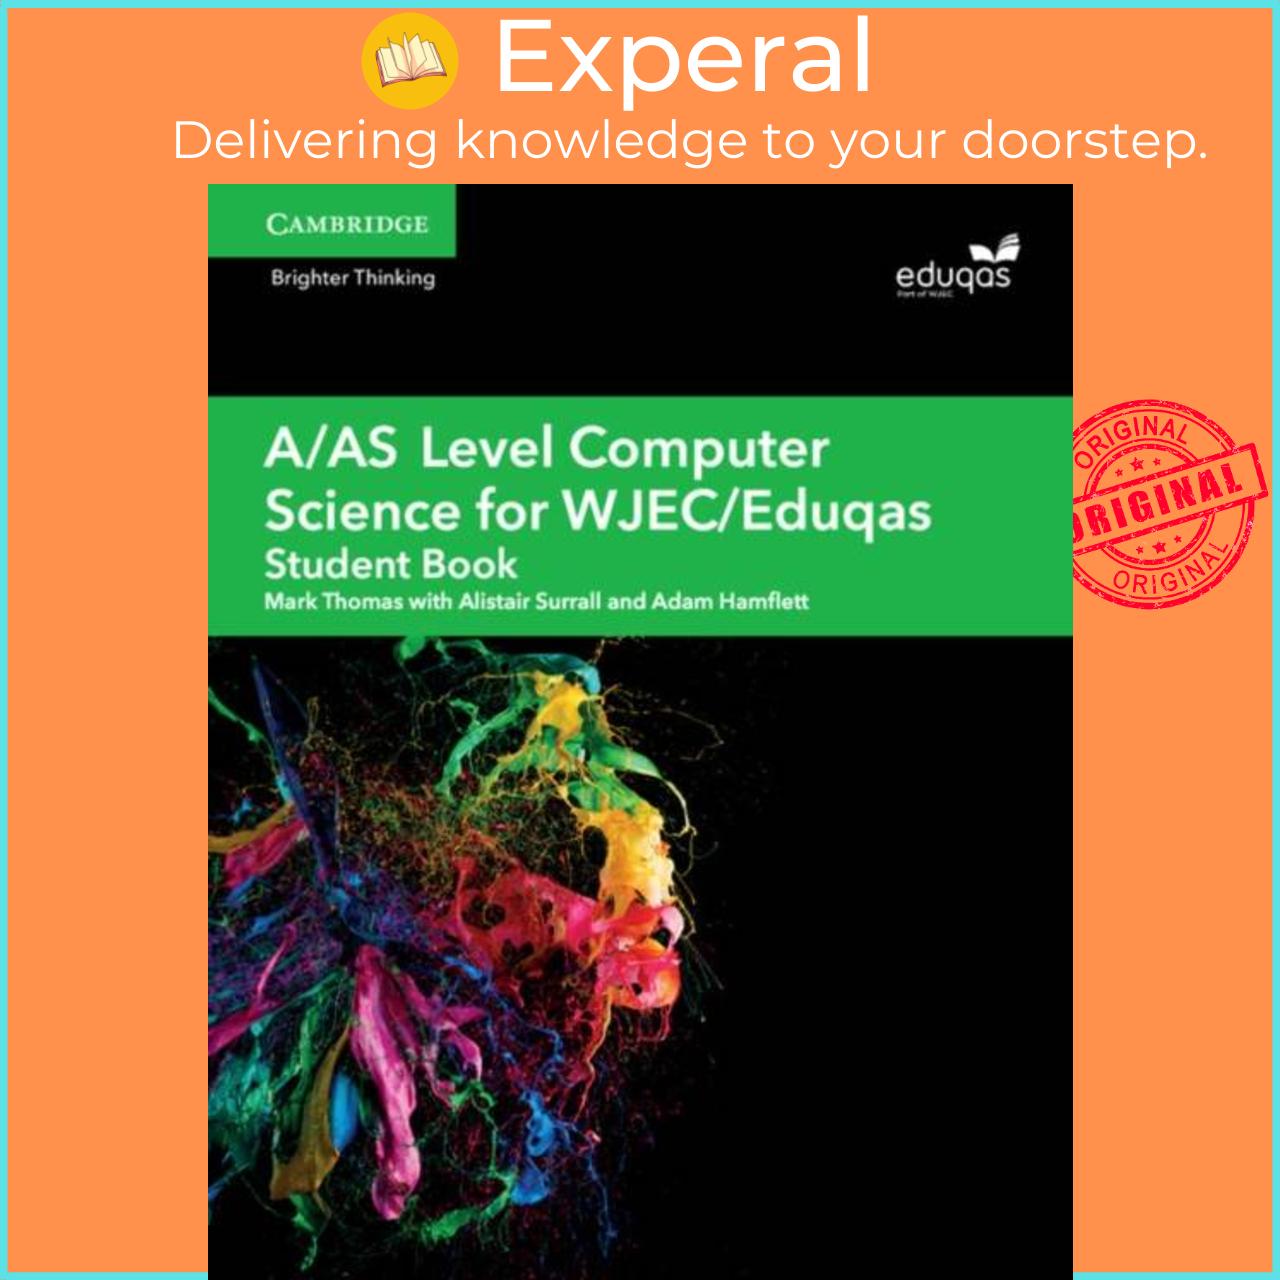 Sách - A/AS Level Computer Science for WJEC/Eduqas Student Book by Alistair Surrall (UK edition, paperback)